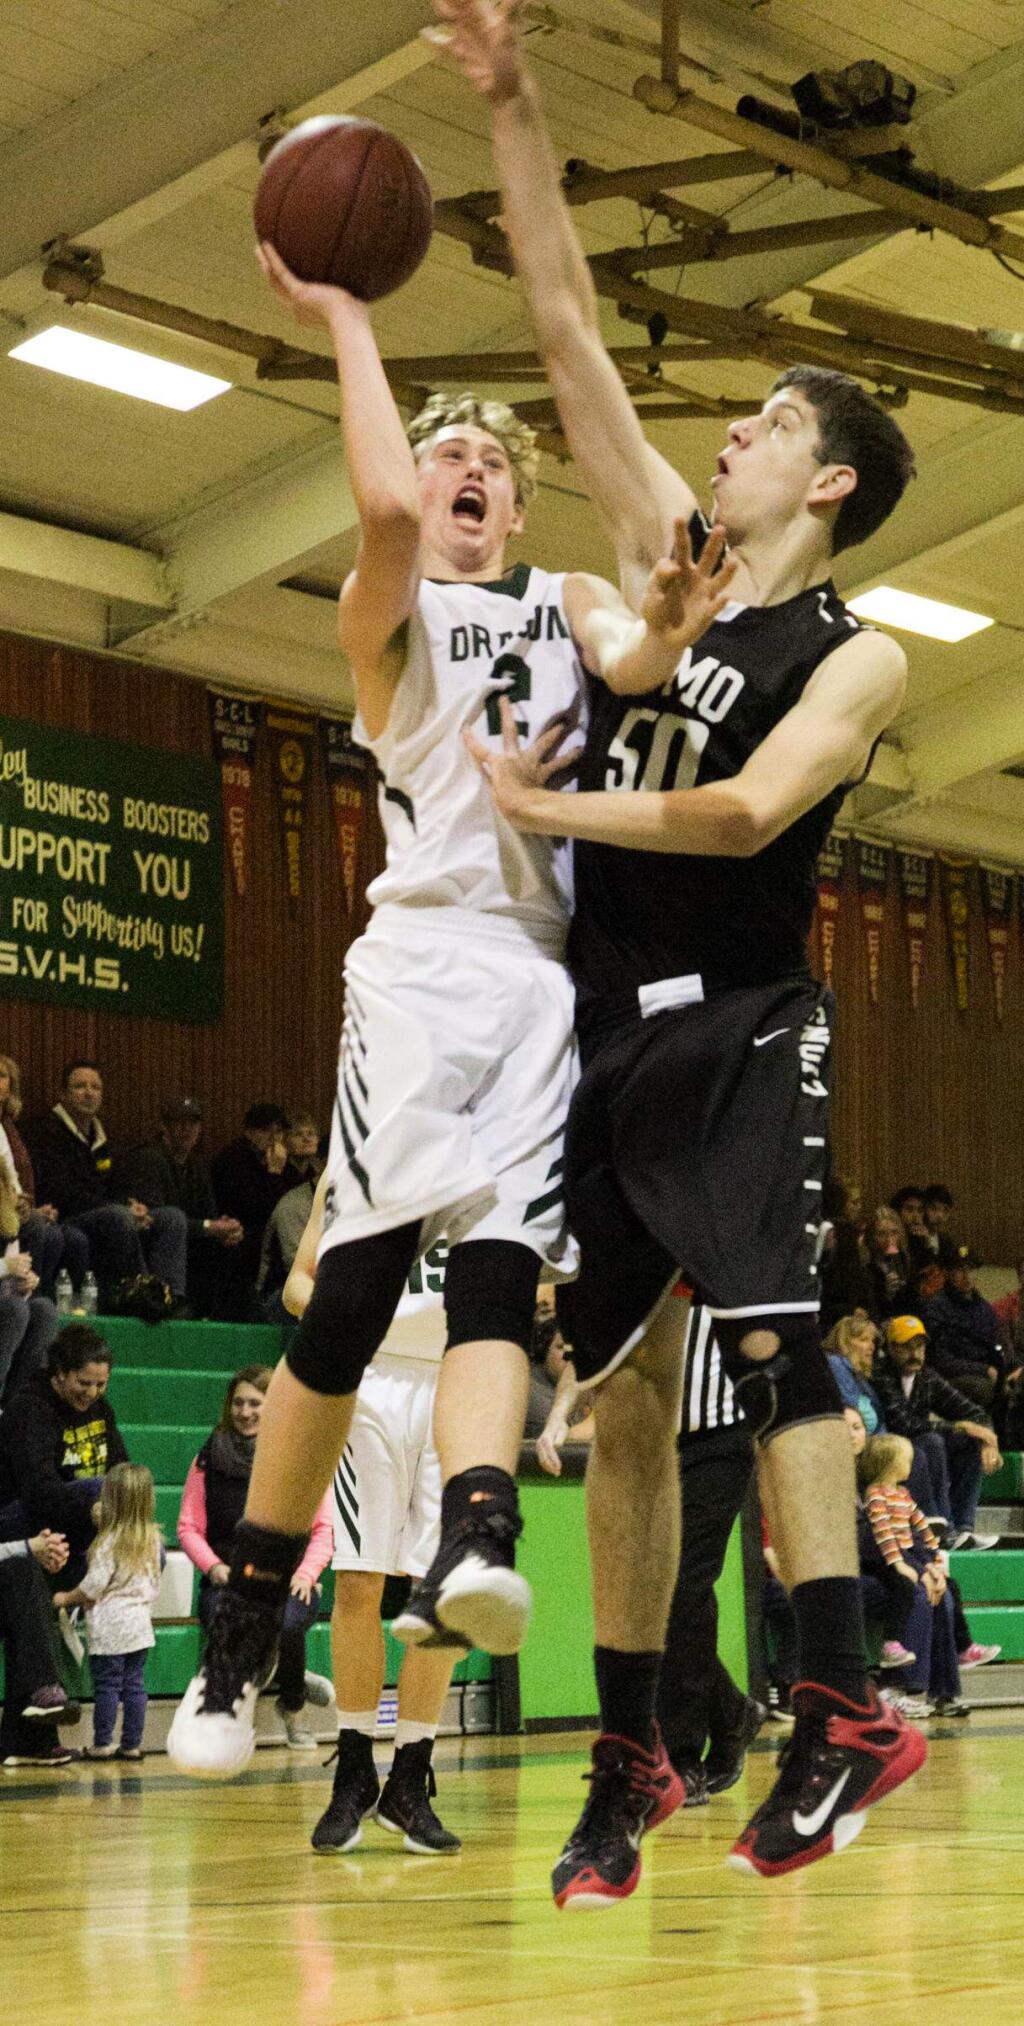 Julie Vader/Special to the Index-TribuneSonoma's Luke Severson goes up for a shot in Friday's game against El Molino. The Dragons won 43-26. Sonoma will host Healdsburg Wednesday in the Dragons home finale.